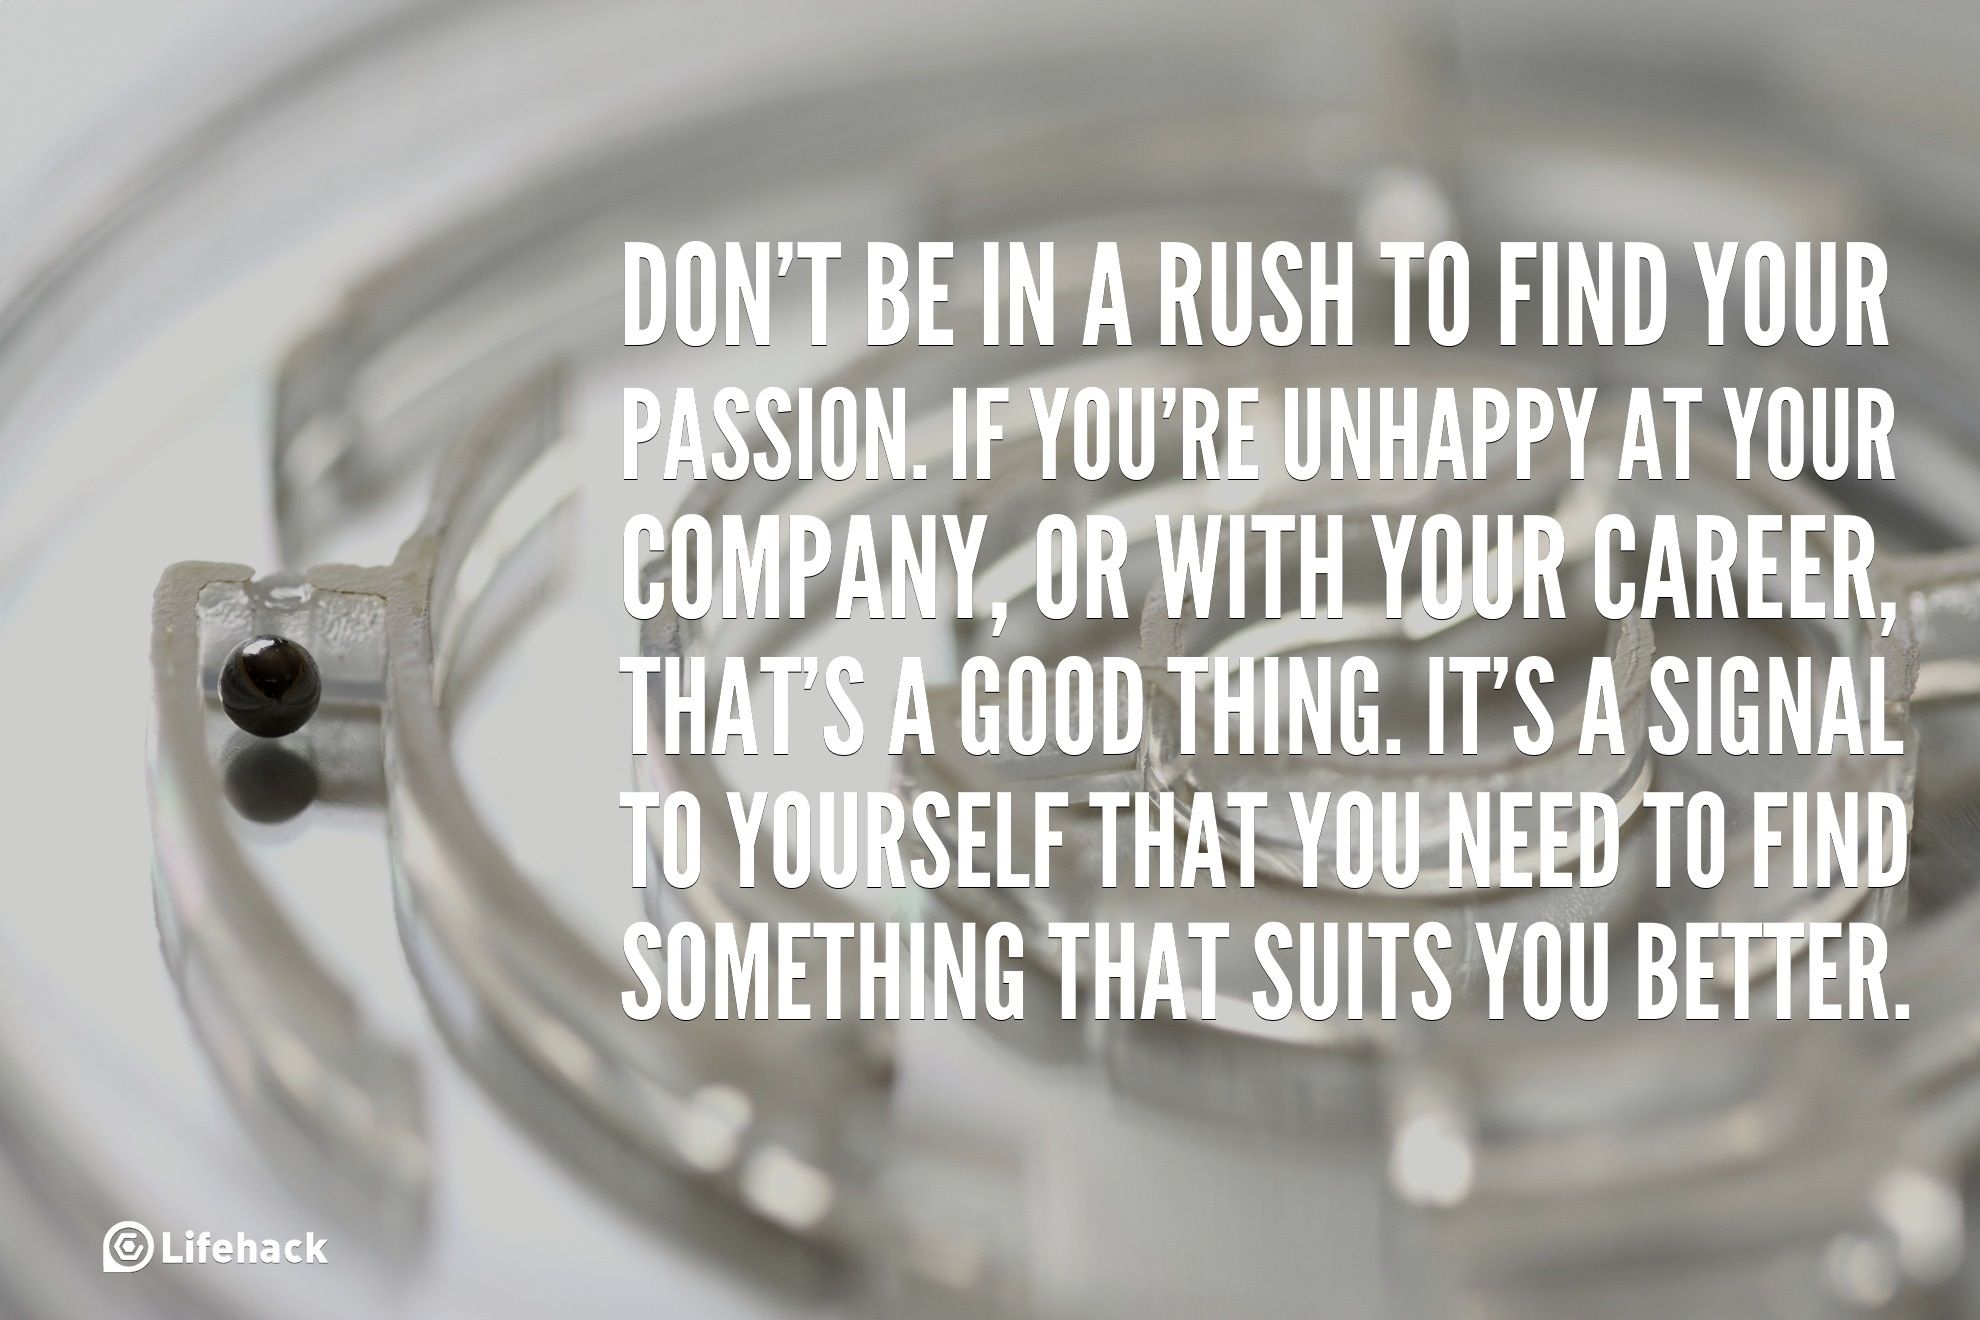 30sec Tip: Don’t Be in a Rush to Find Your Passion